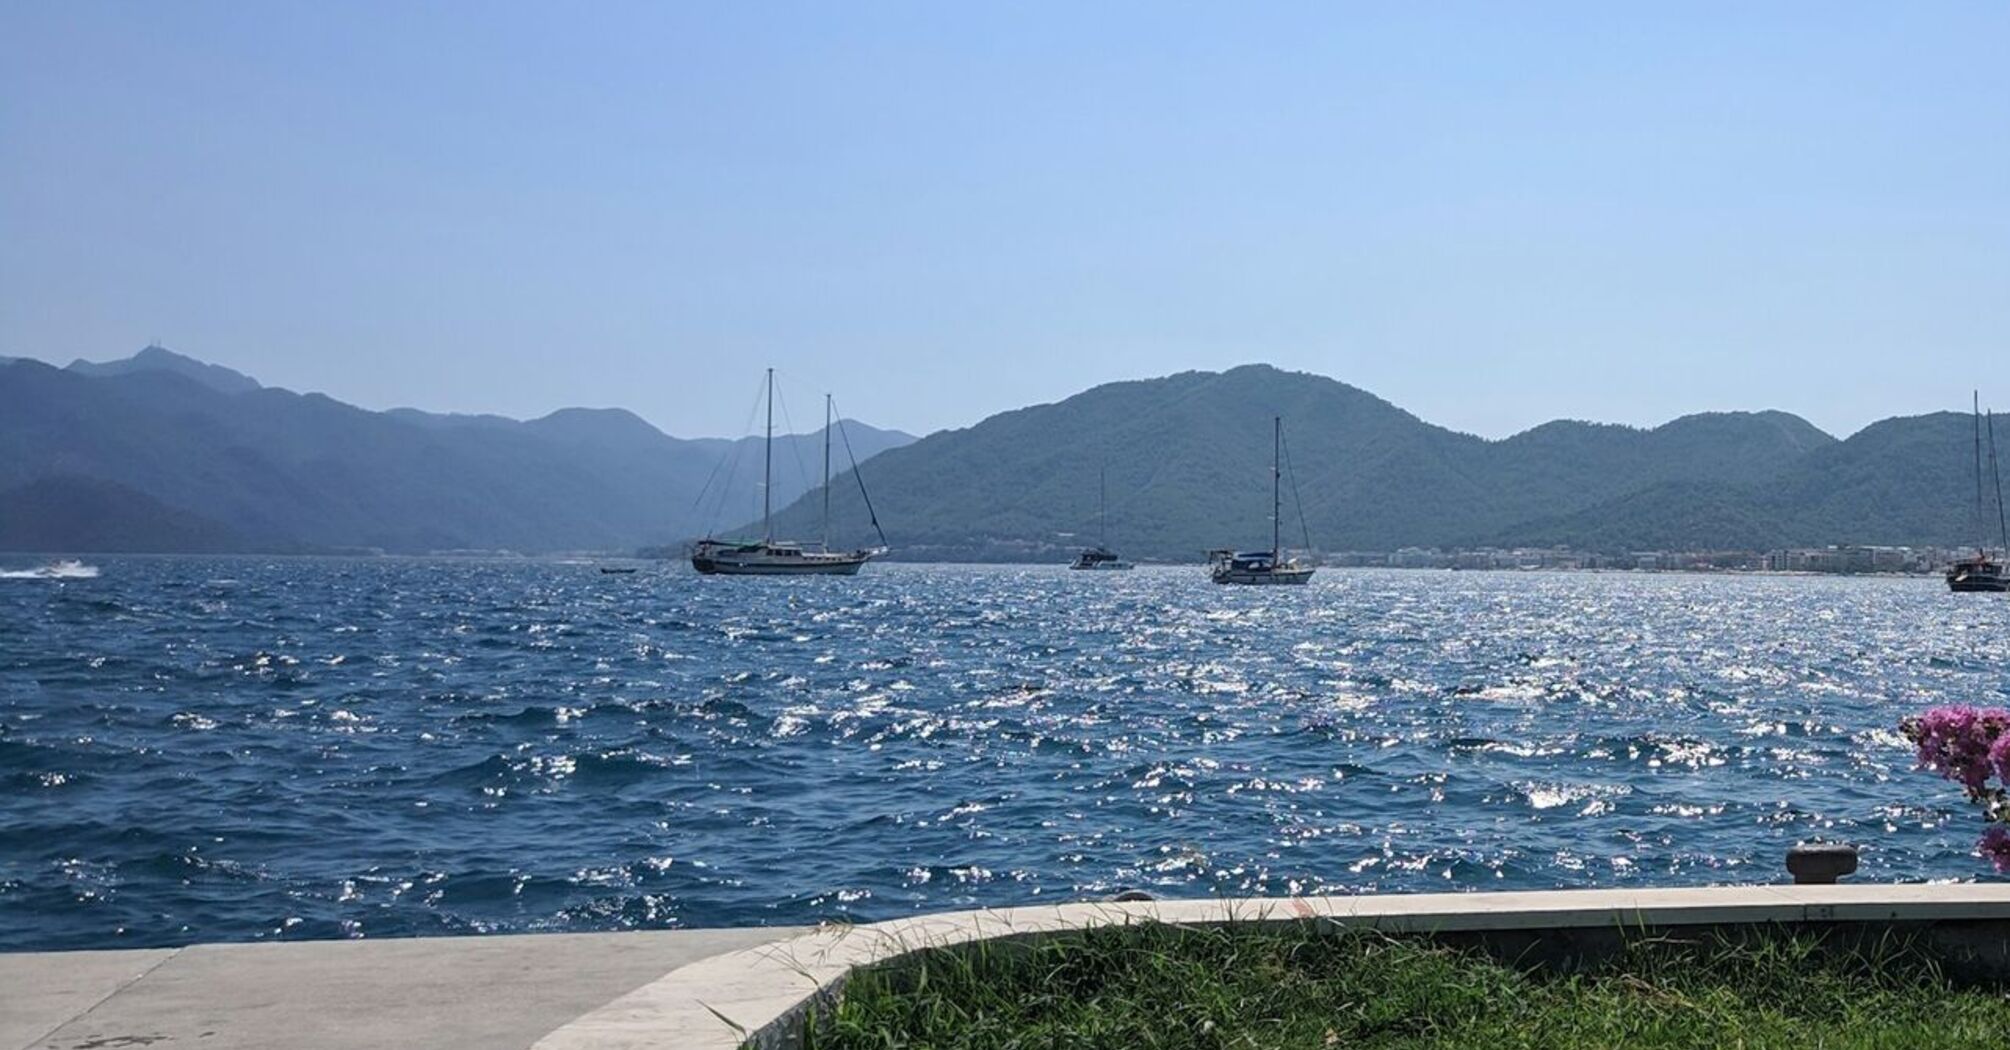 Boats on a calm sea with mountainous background in Marmaris, Turkey